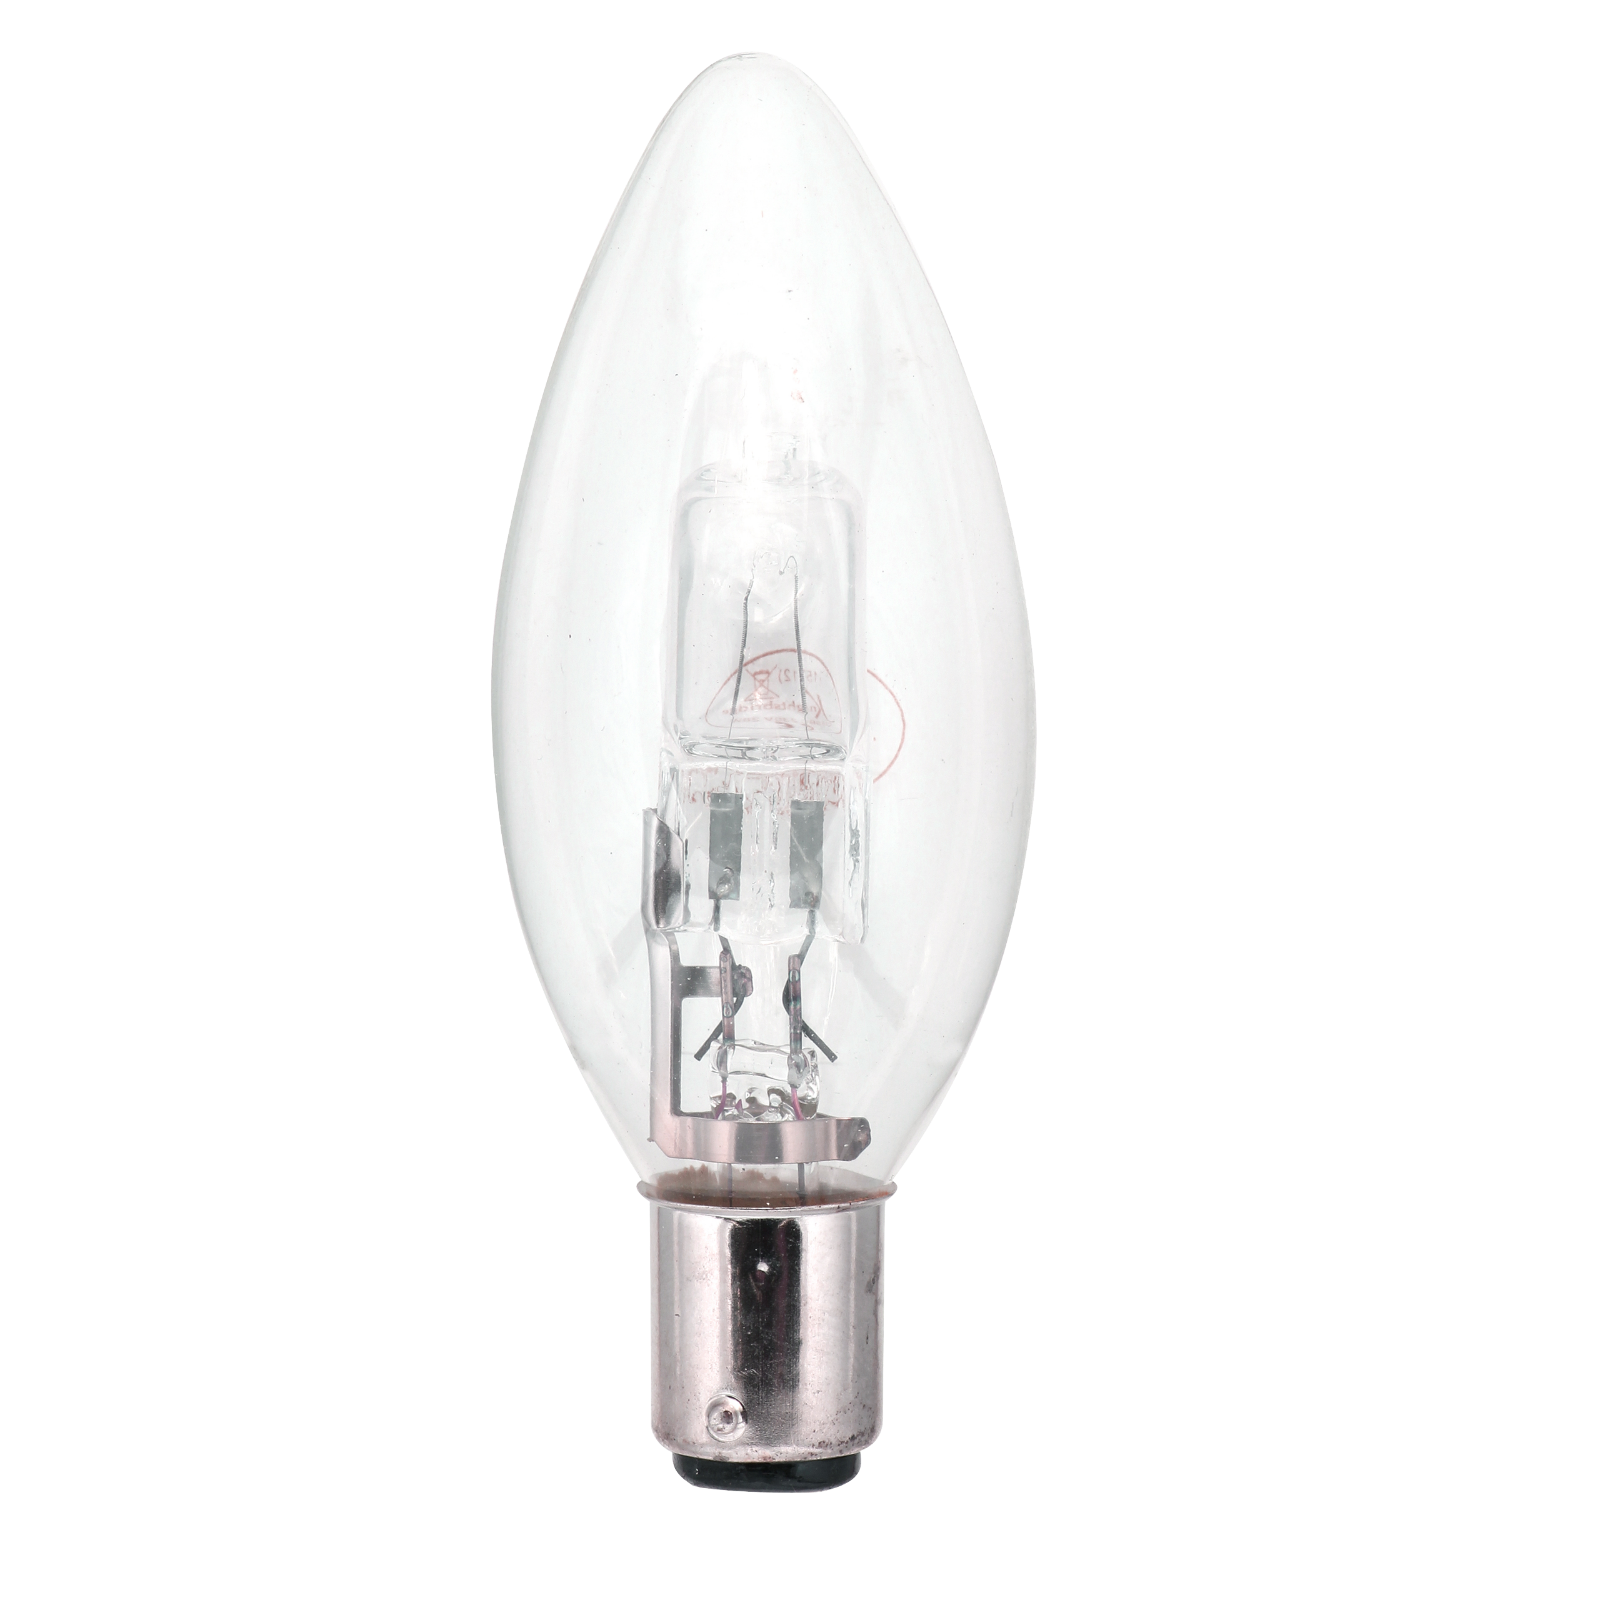 28W Halogen Energy Saving Clear Candle Lamp SBC (equivalent To 40W) - HALO-C28SBC 